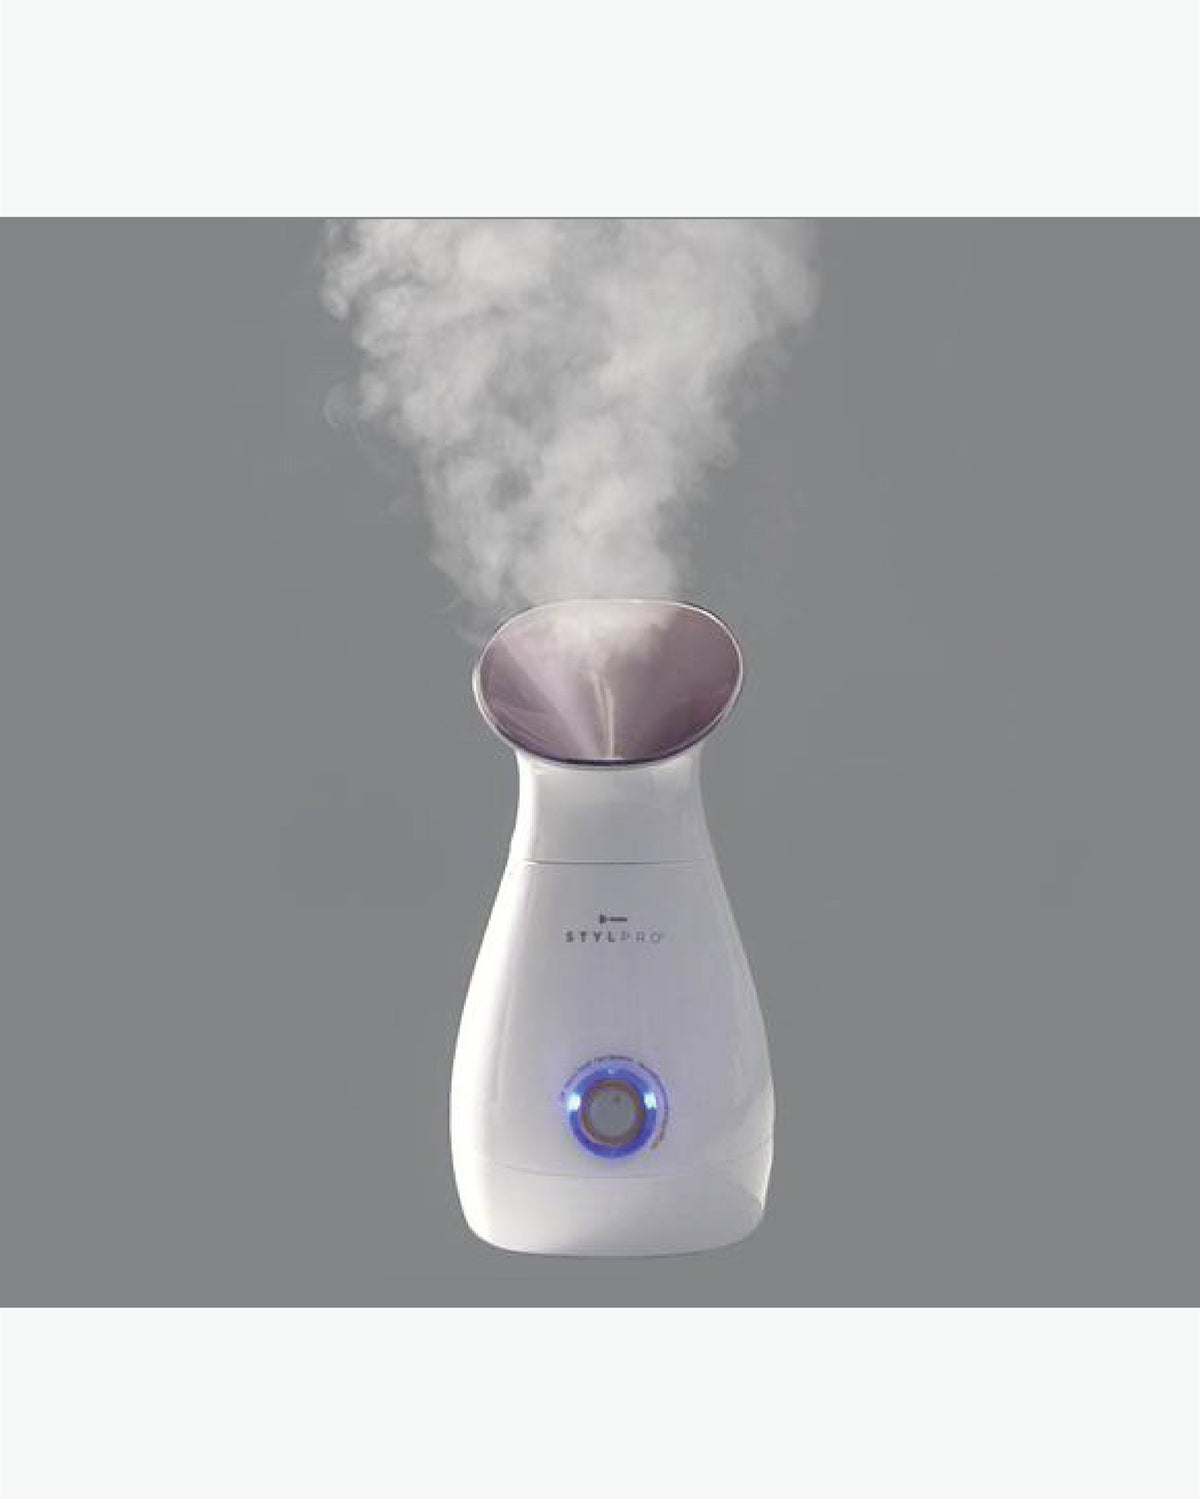 Stylpro Ionic Spa Facial Steamer